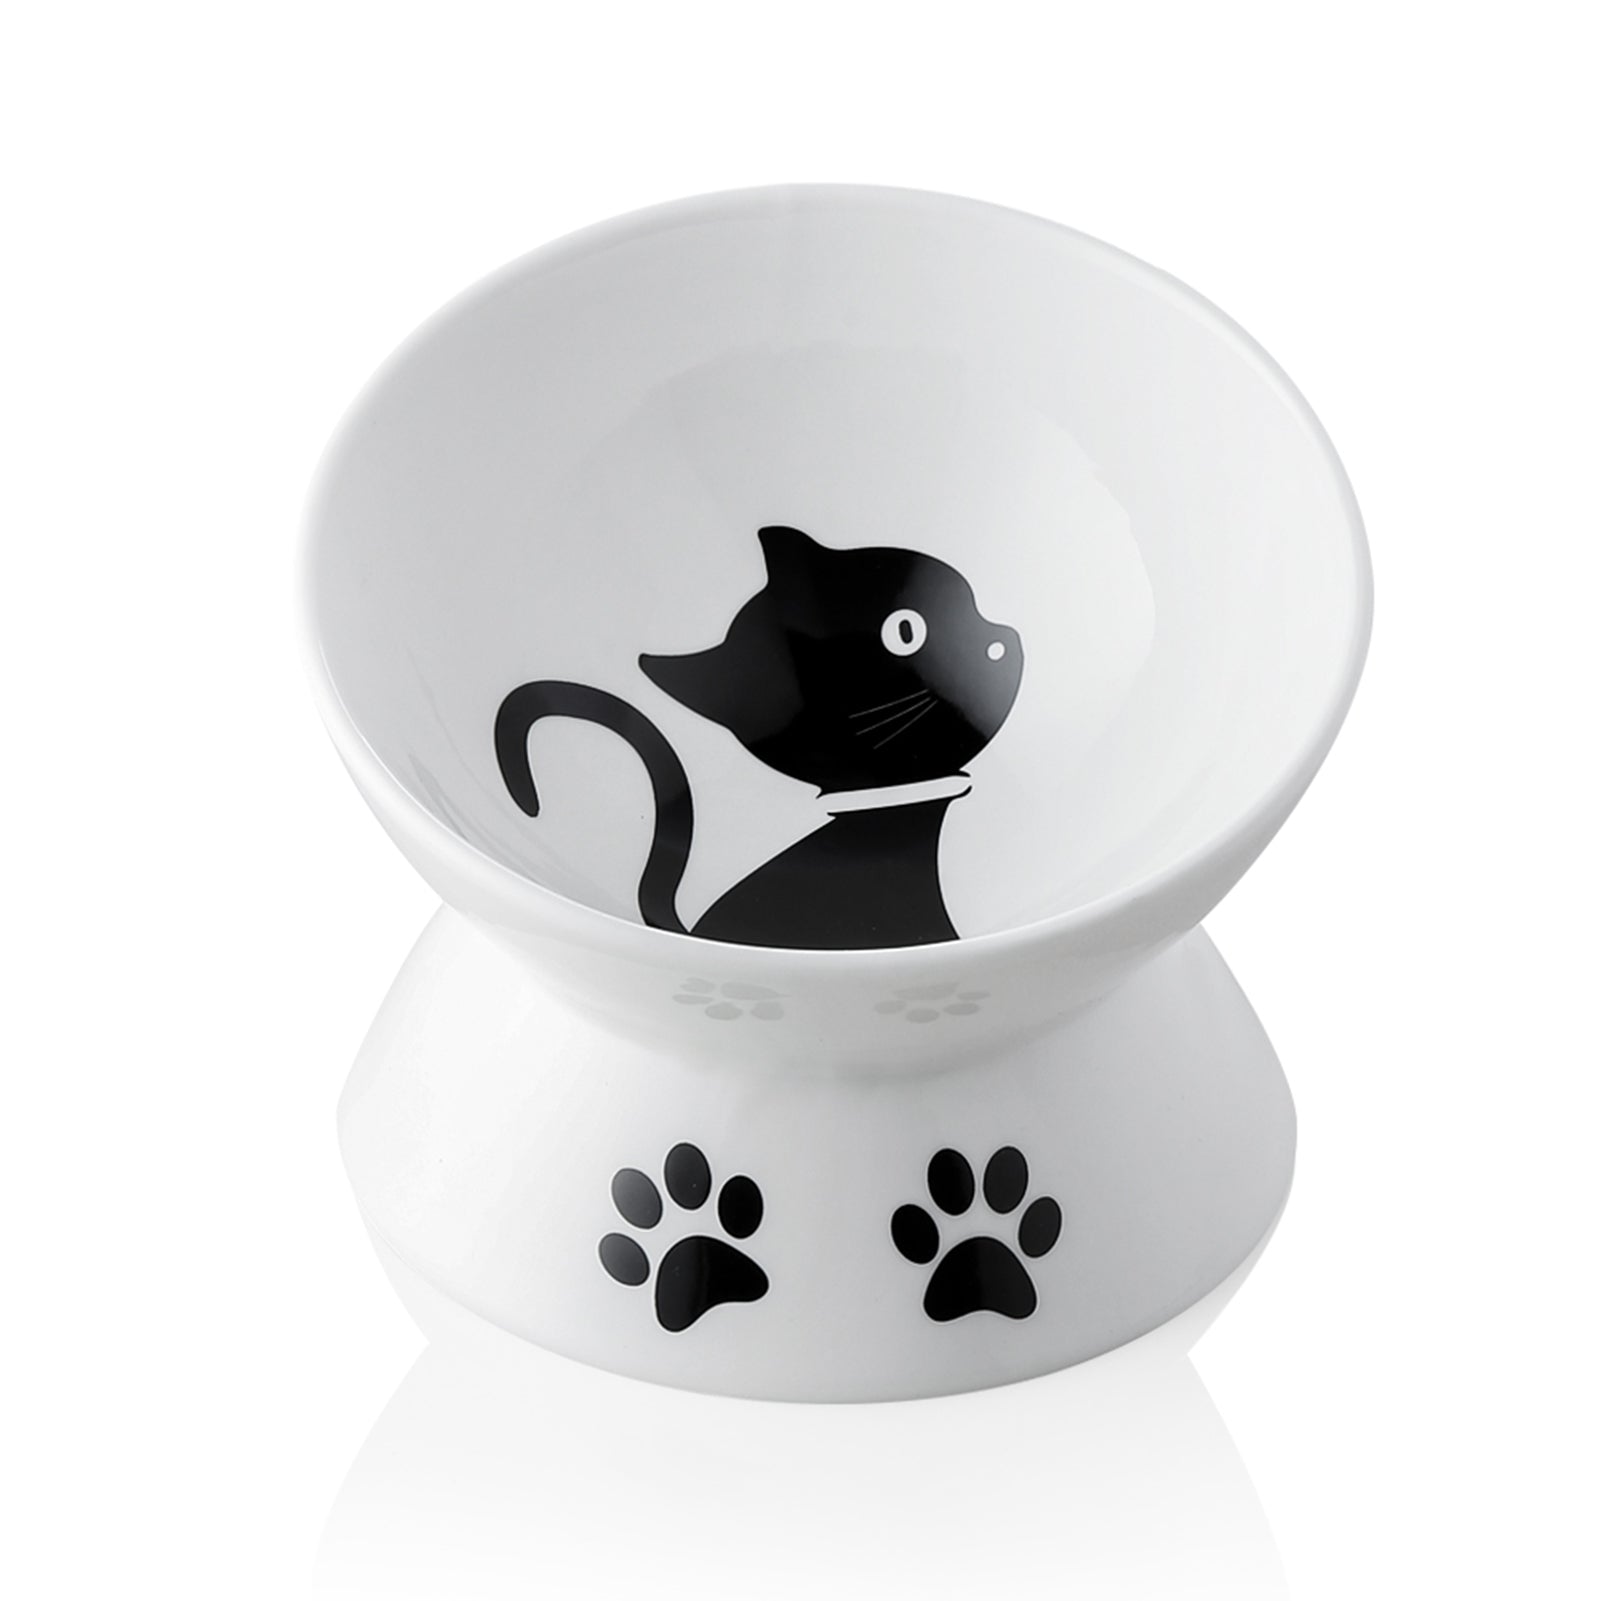 SWEEJAR Gradient Dog Bowl, Ceramic Dog Food Dish for Large Dogs and Large  Cat, Porcelain Pet Bowl for Food and Water